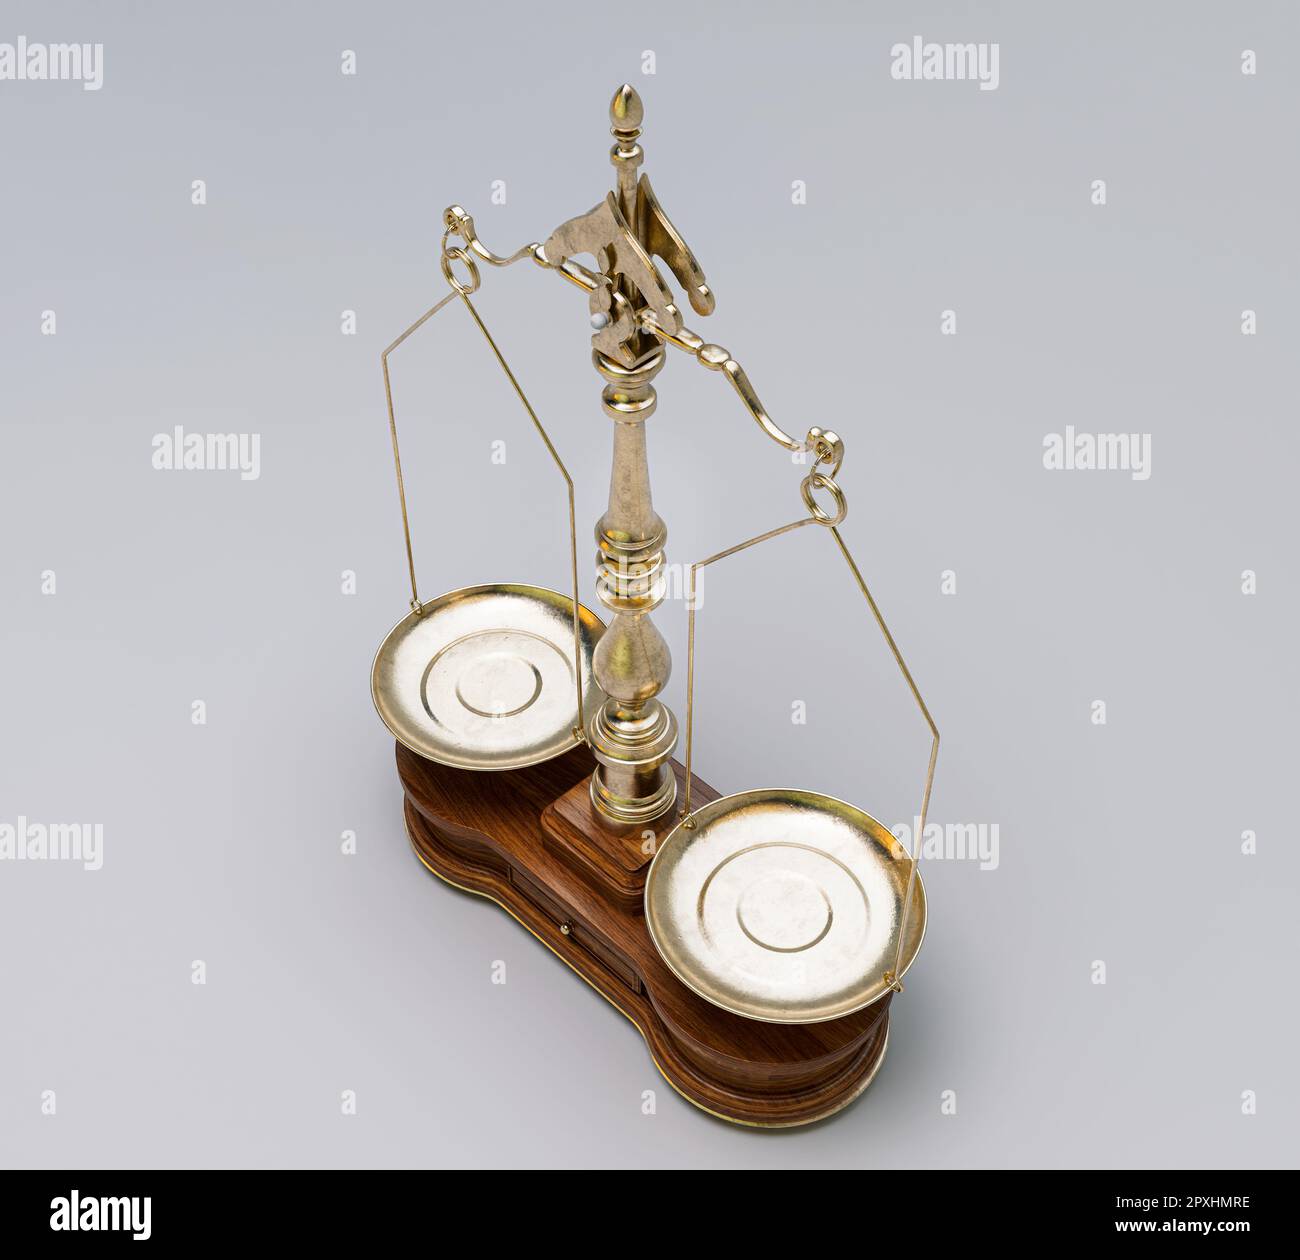 Ornate brass justice scales with a wooden base on a white isolated background - 3D render Stock Photo